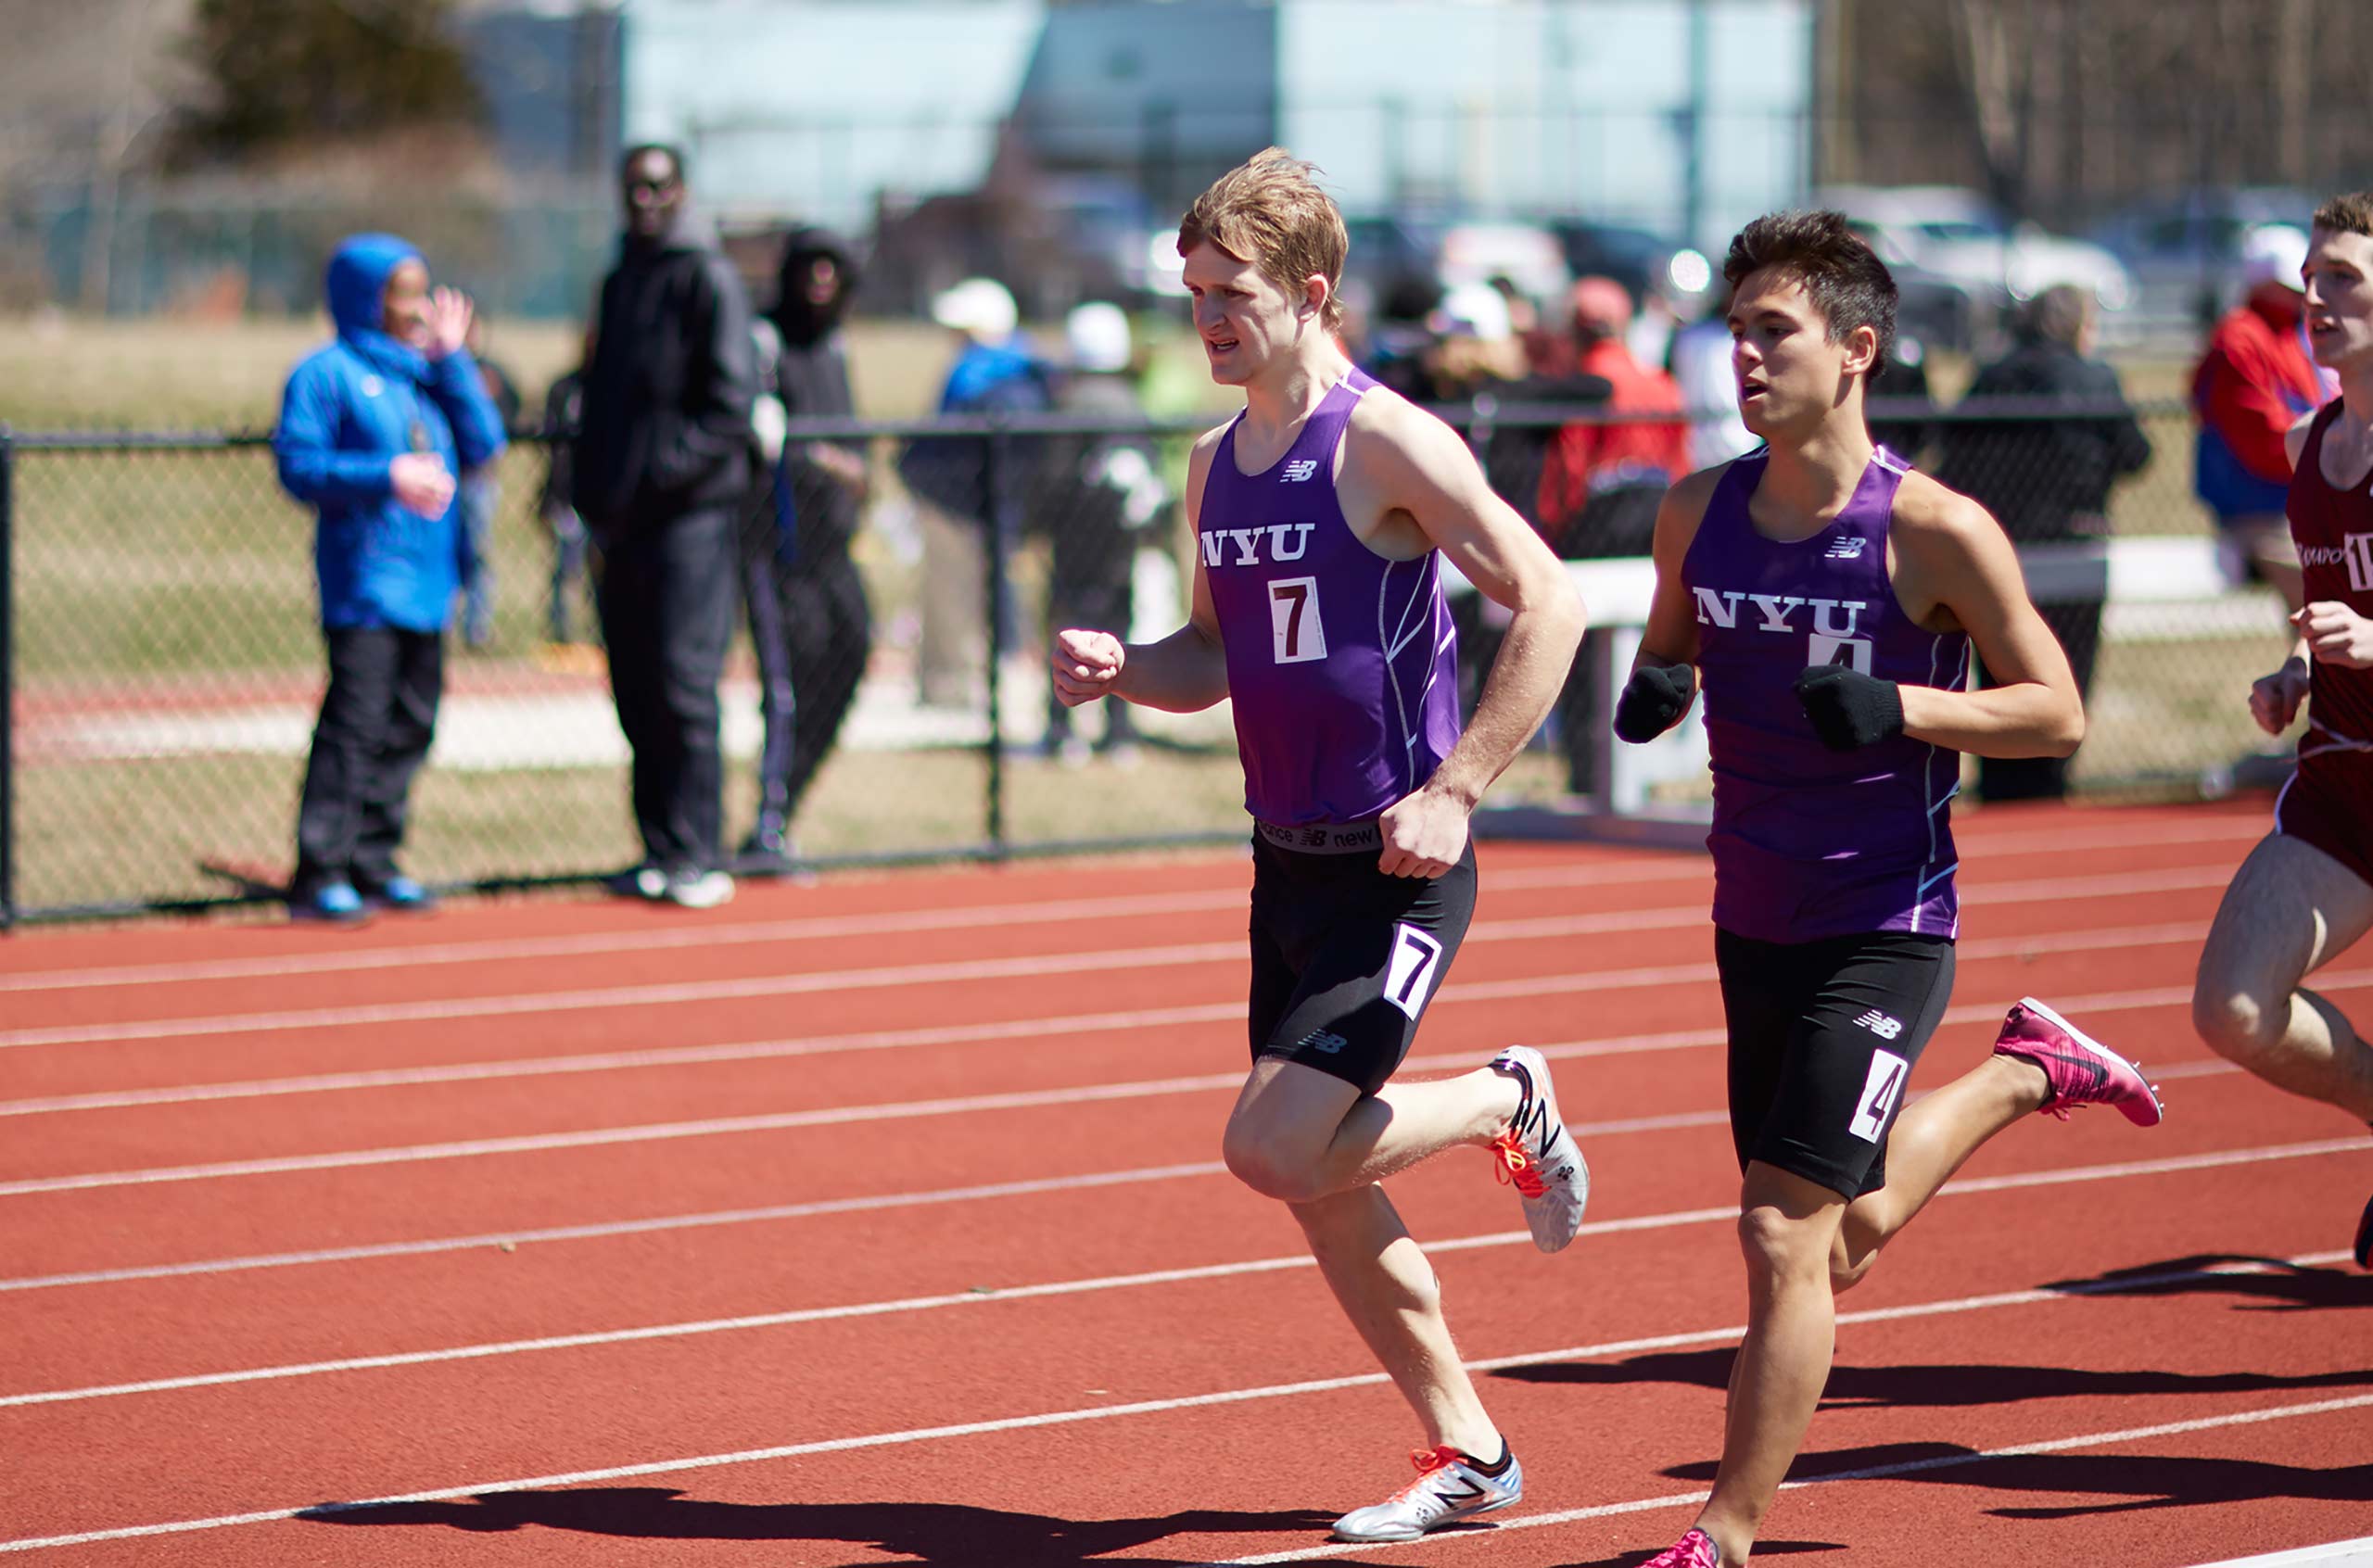 Two NYU track team members participating in a race